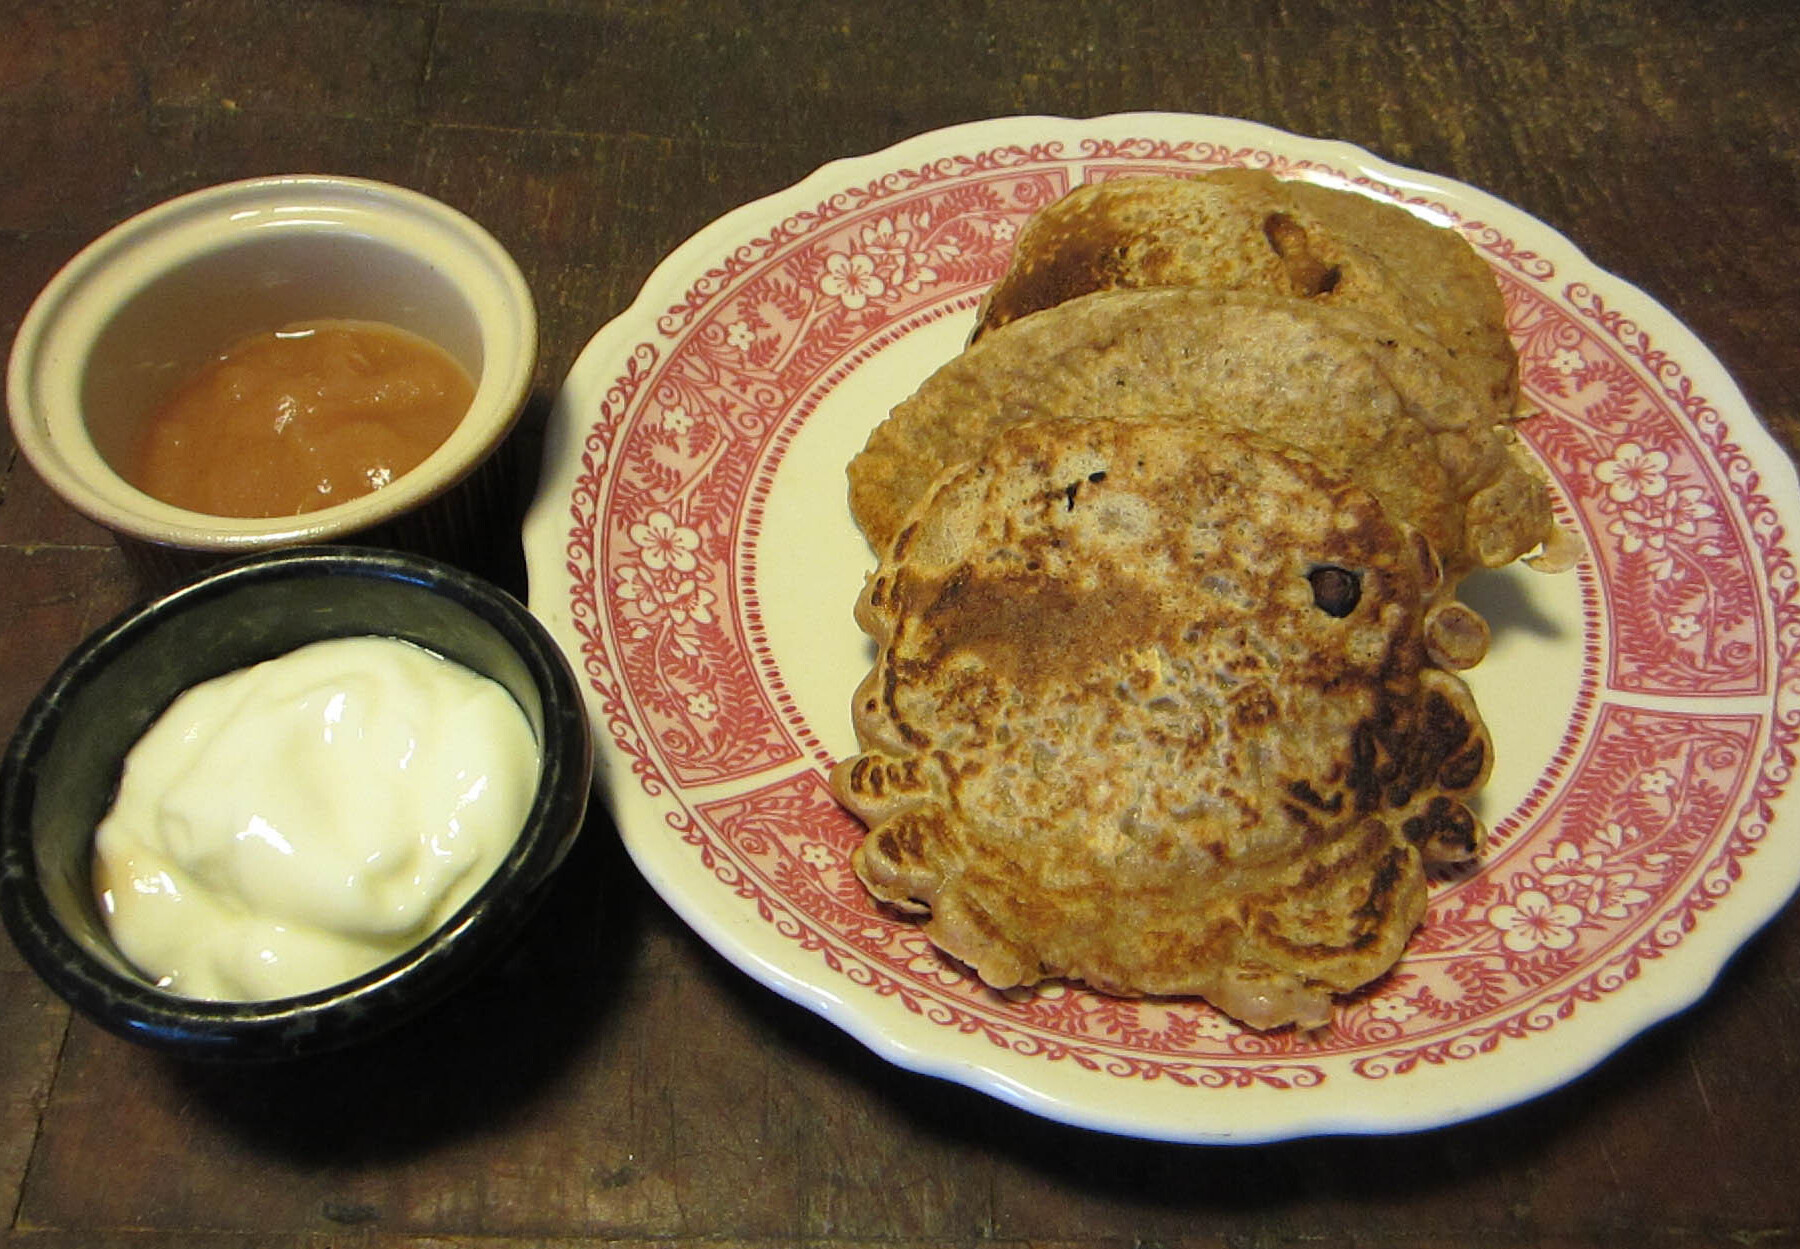 Three wholewheat pancakes served with yogurt and applesauce on the side